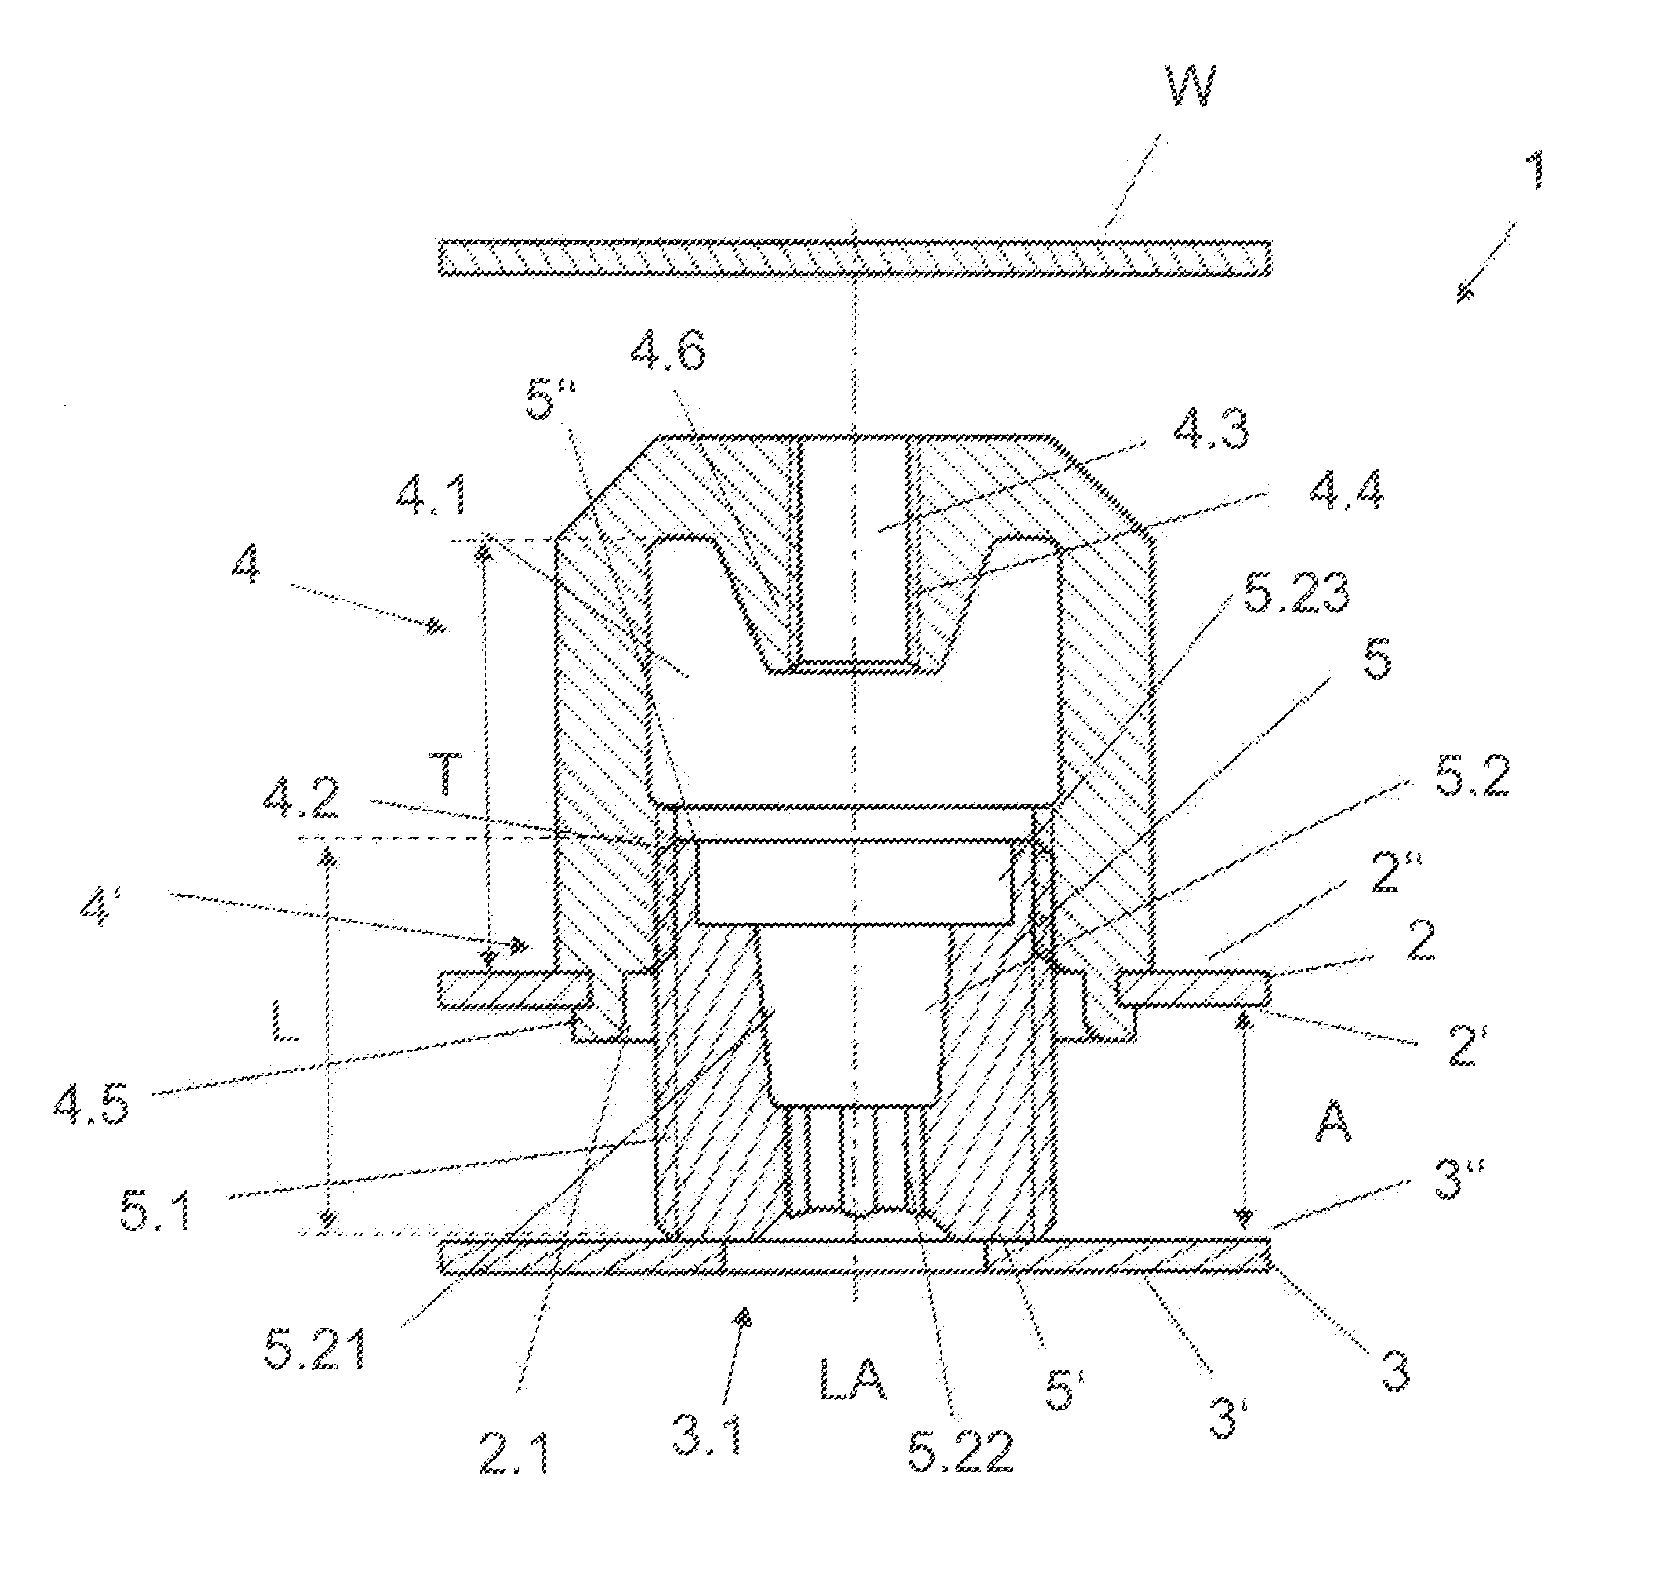 Adjustable fastening device and method for producing a prefabricated subassembly from at least one adjustable fastening device and a component